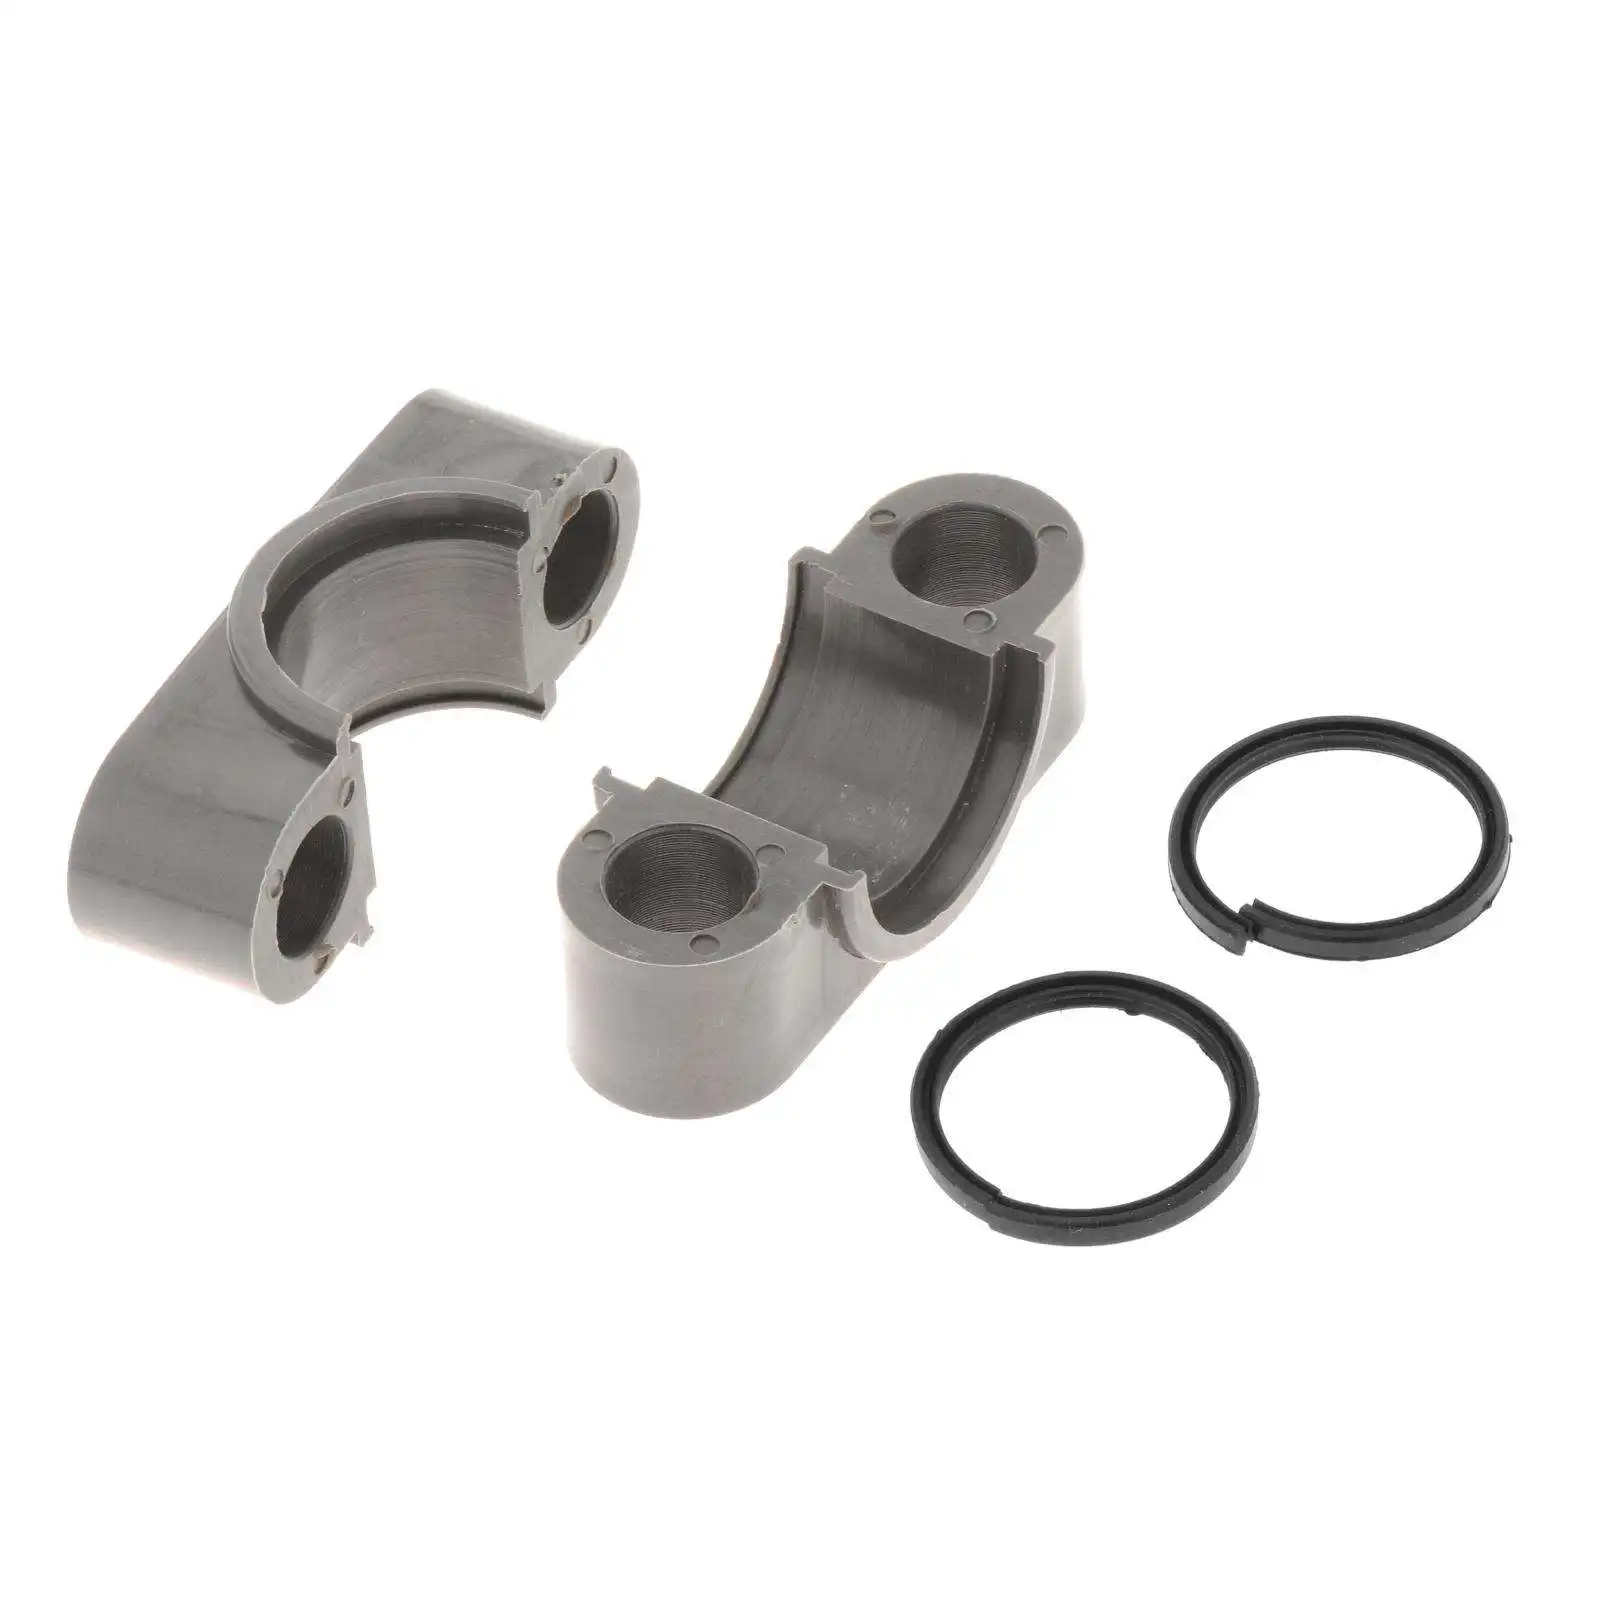 

Motorcycle Steering Stem Bushing Seal Yamaha 450 Warrior 1UY-23812-00-00 Replace Accessories Parts Easy Install